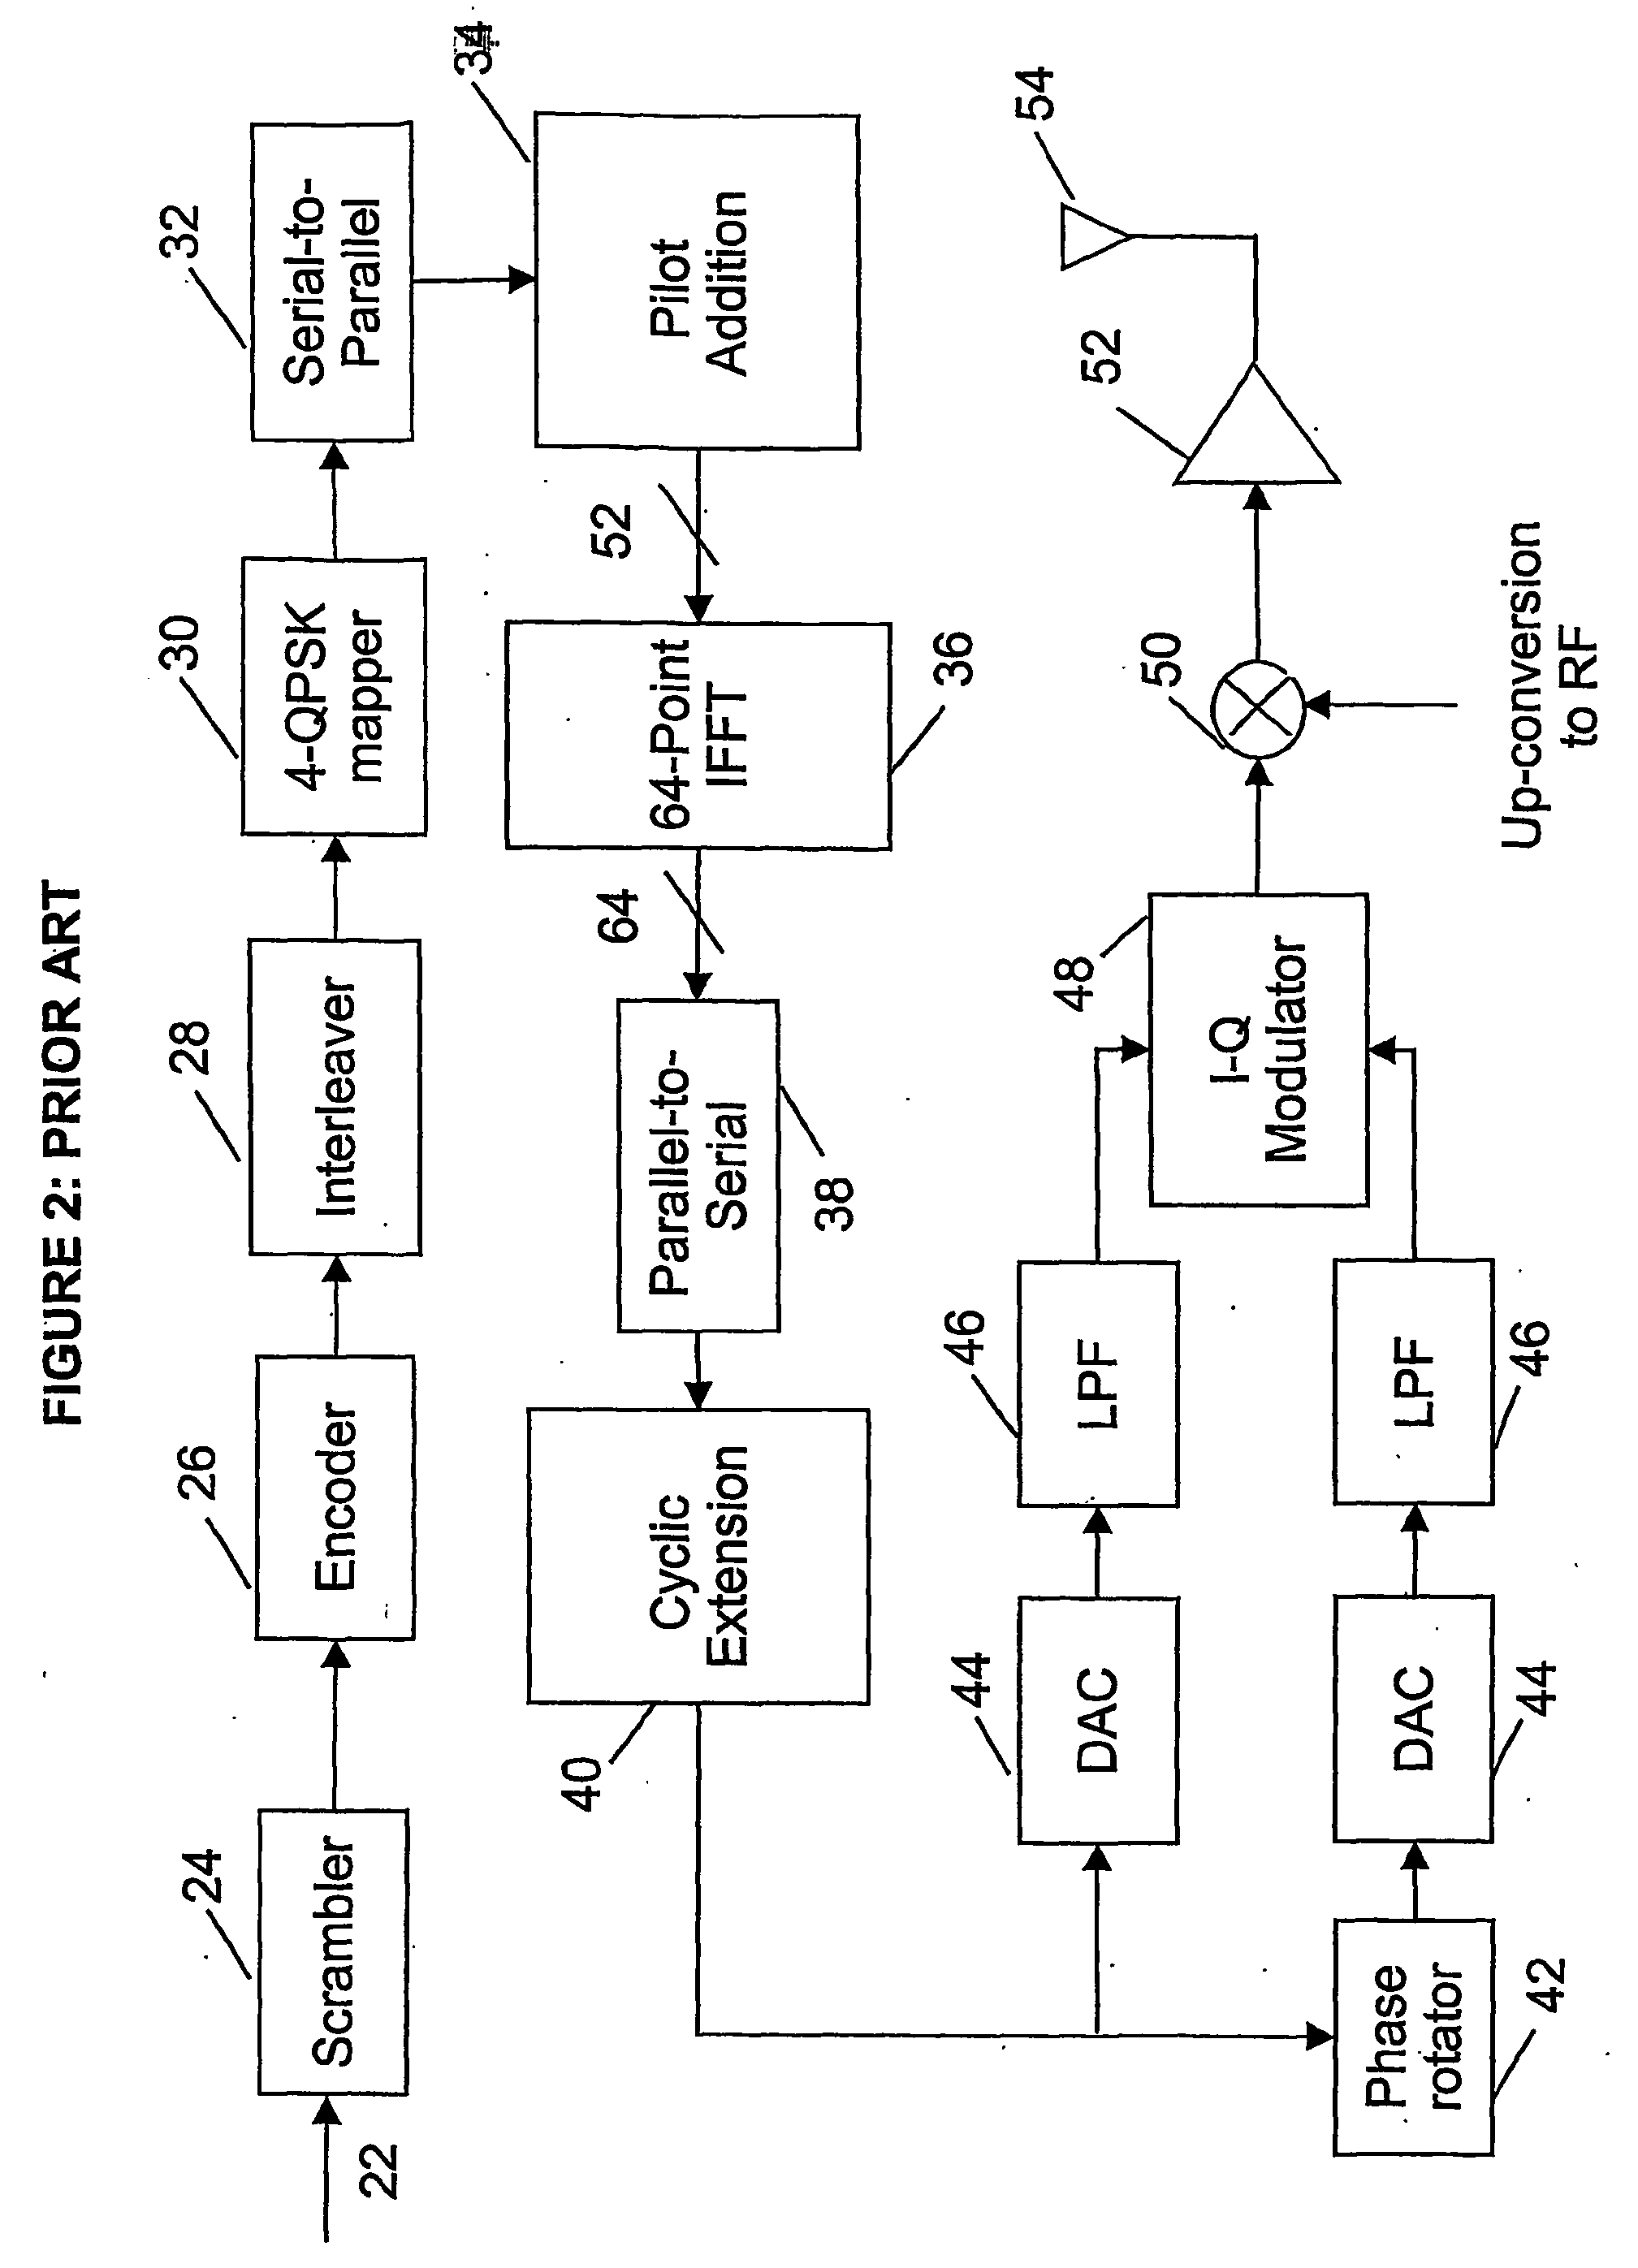 Method and apparatus for discrete power synthesis of multicarrier signals with constant envelope power amplifiers